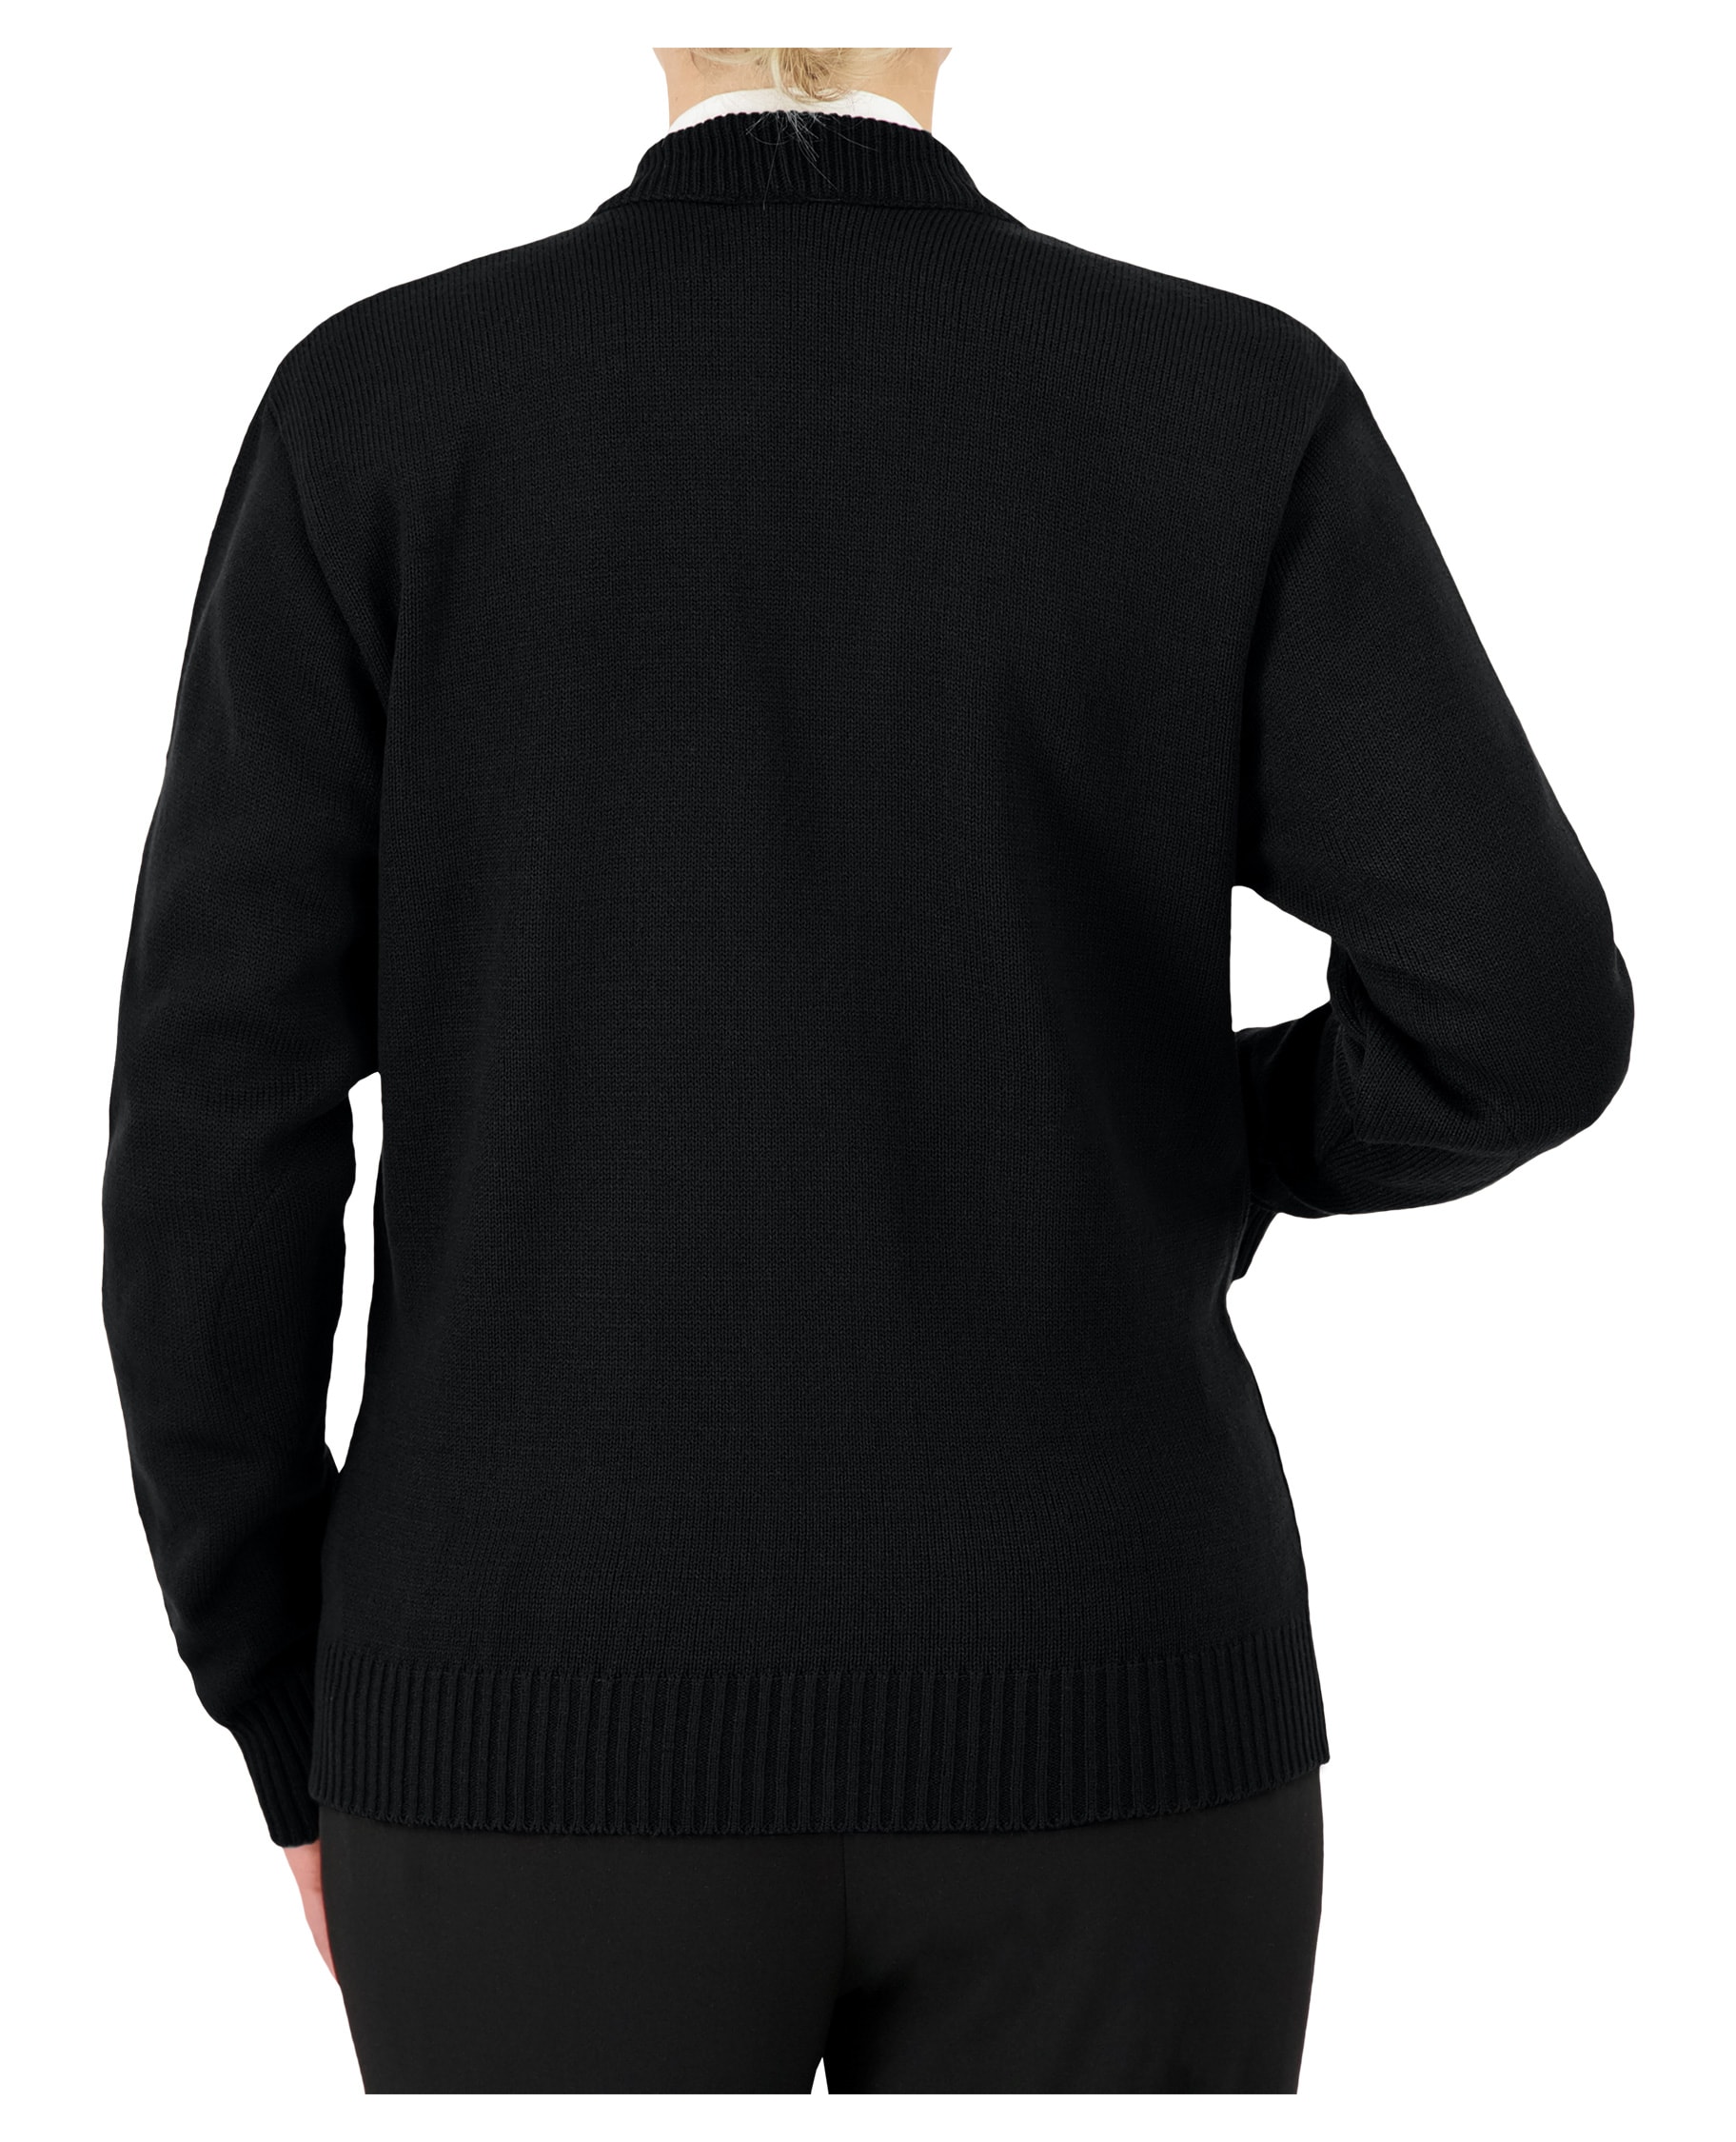 back of black zip up sweater with pockets